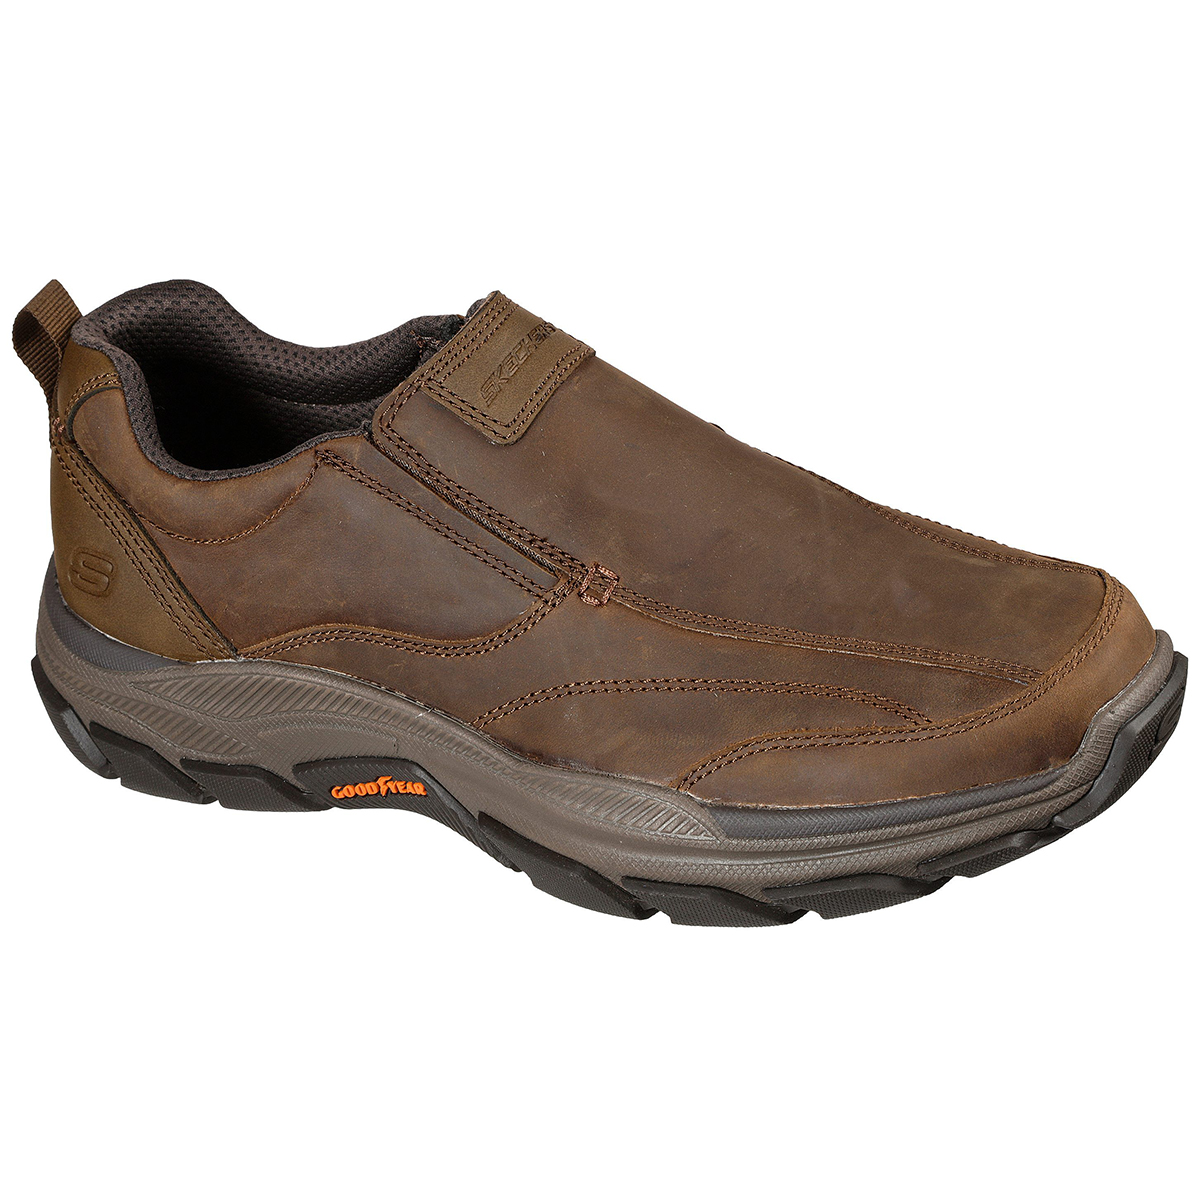 Skechers Men's Relaxed Fit: Respected - Lowry Shoe